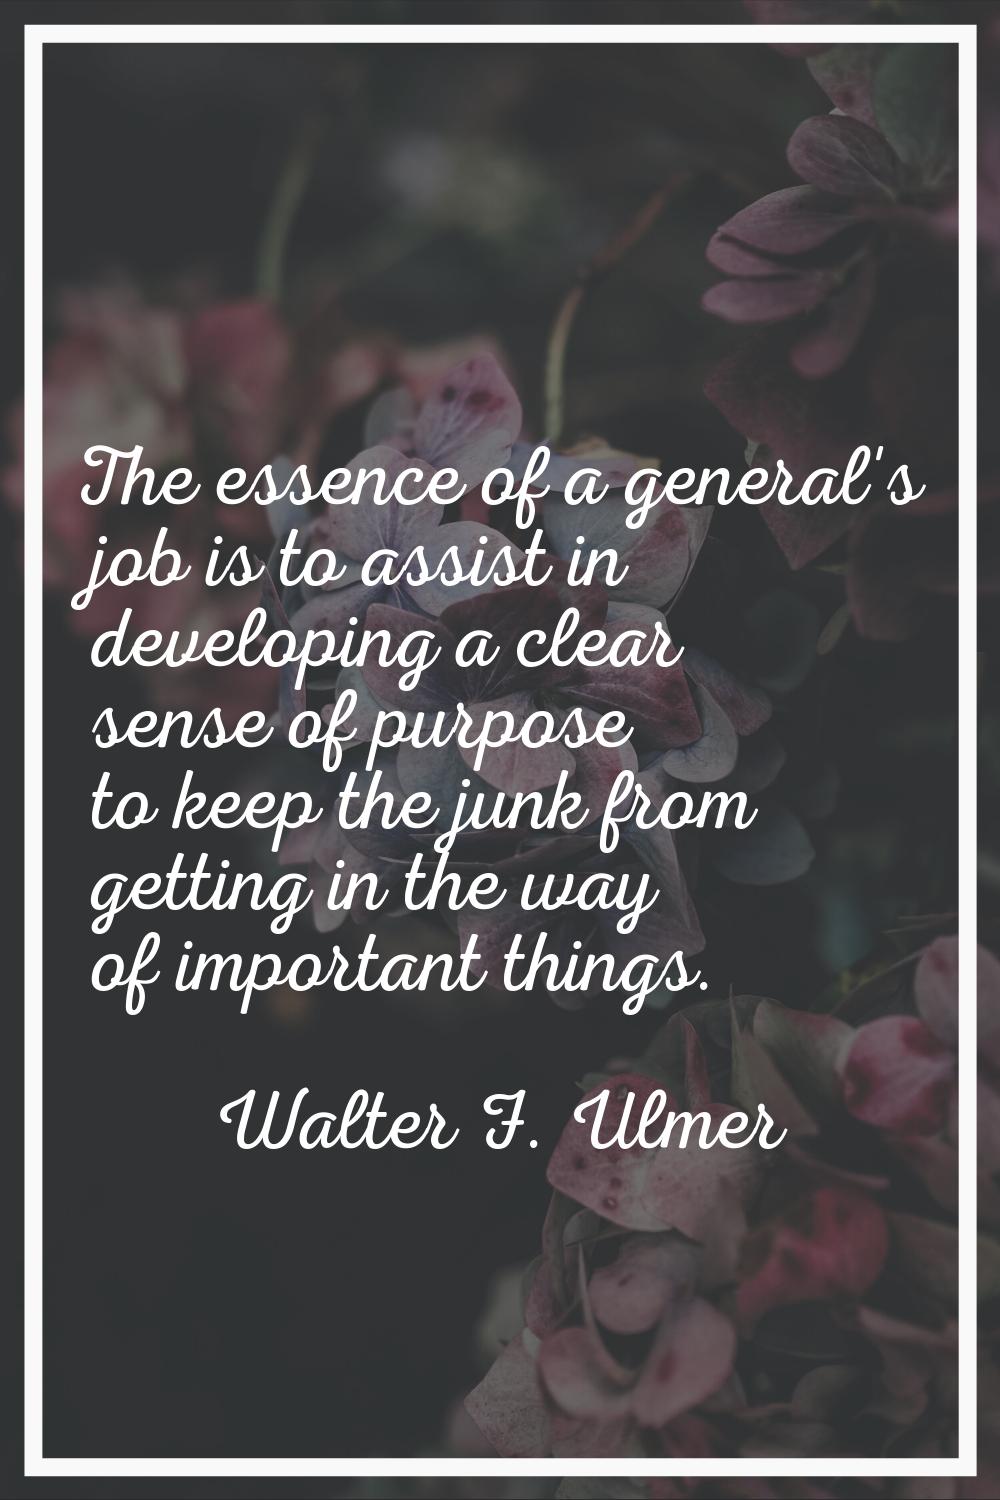 The essence of a general's job is to assist in developing a clear sense of purpose to keep the junk